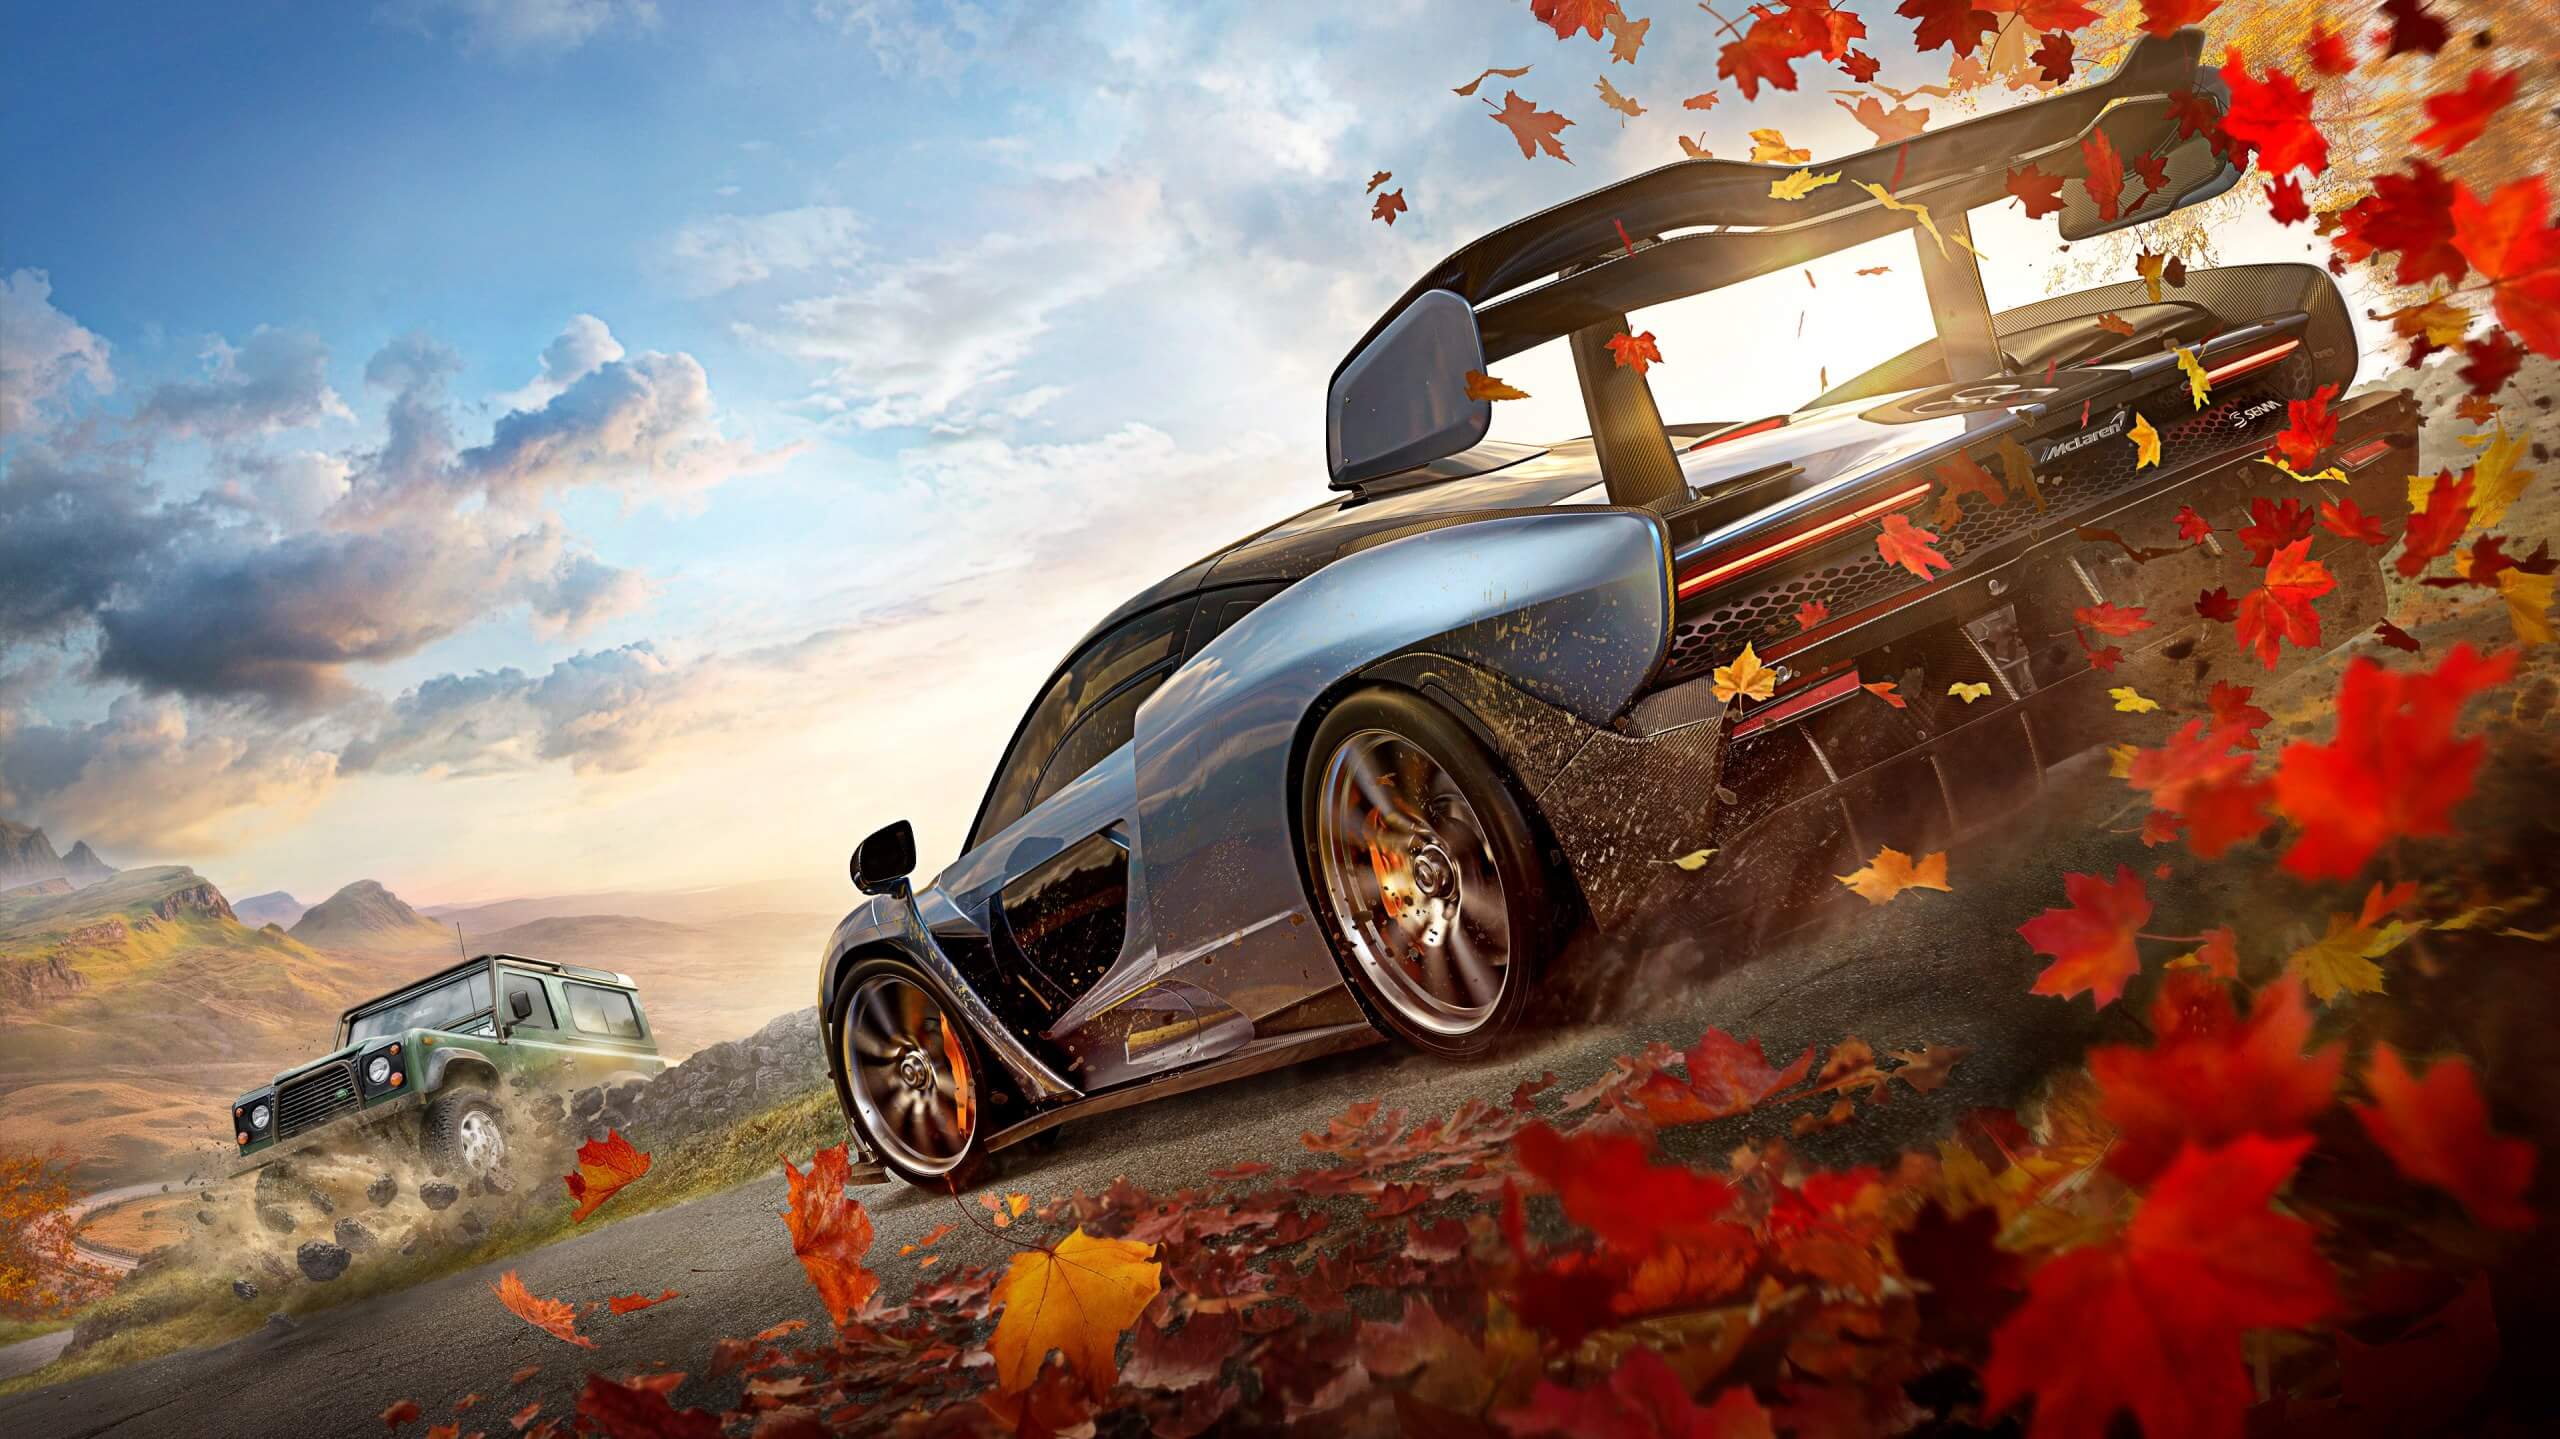 Forza Horizon 4 frequently gets stuck in an endless download loop